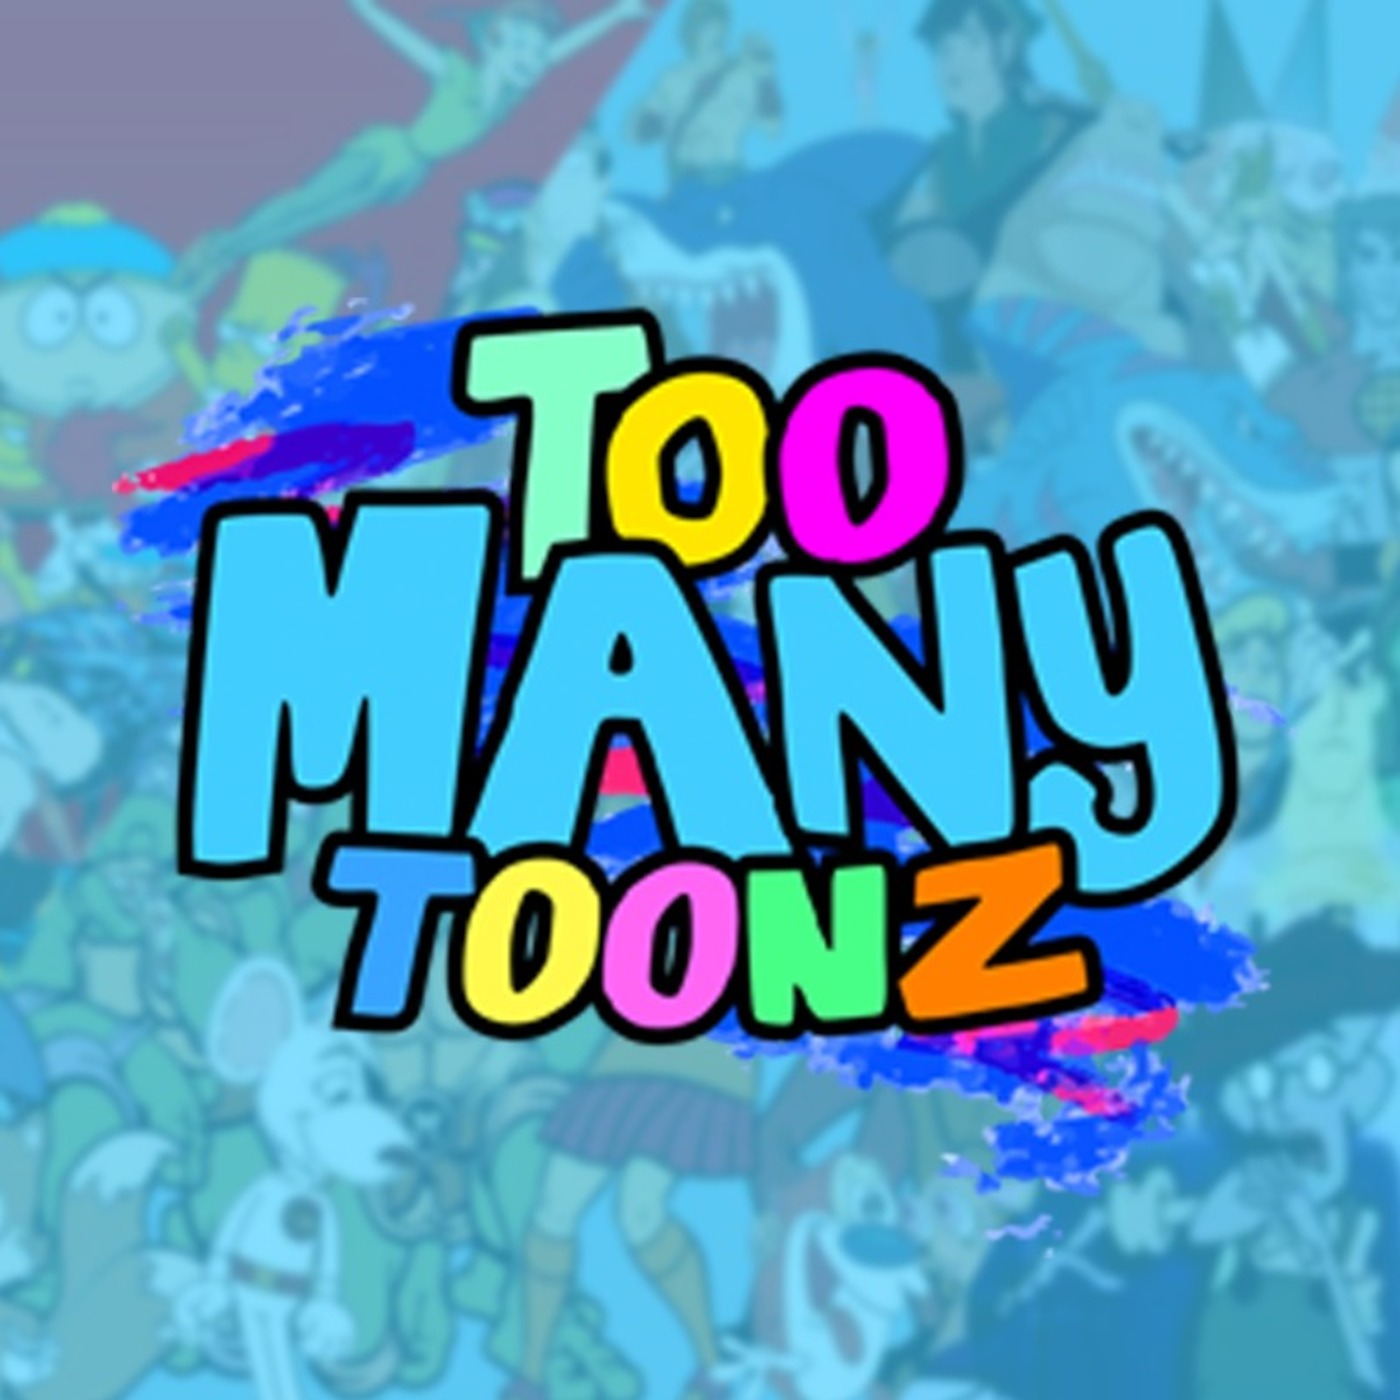 Mister T Ep. 7 - Ep. 4 - Too Many Toonz!